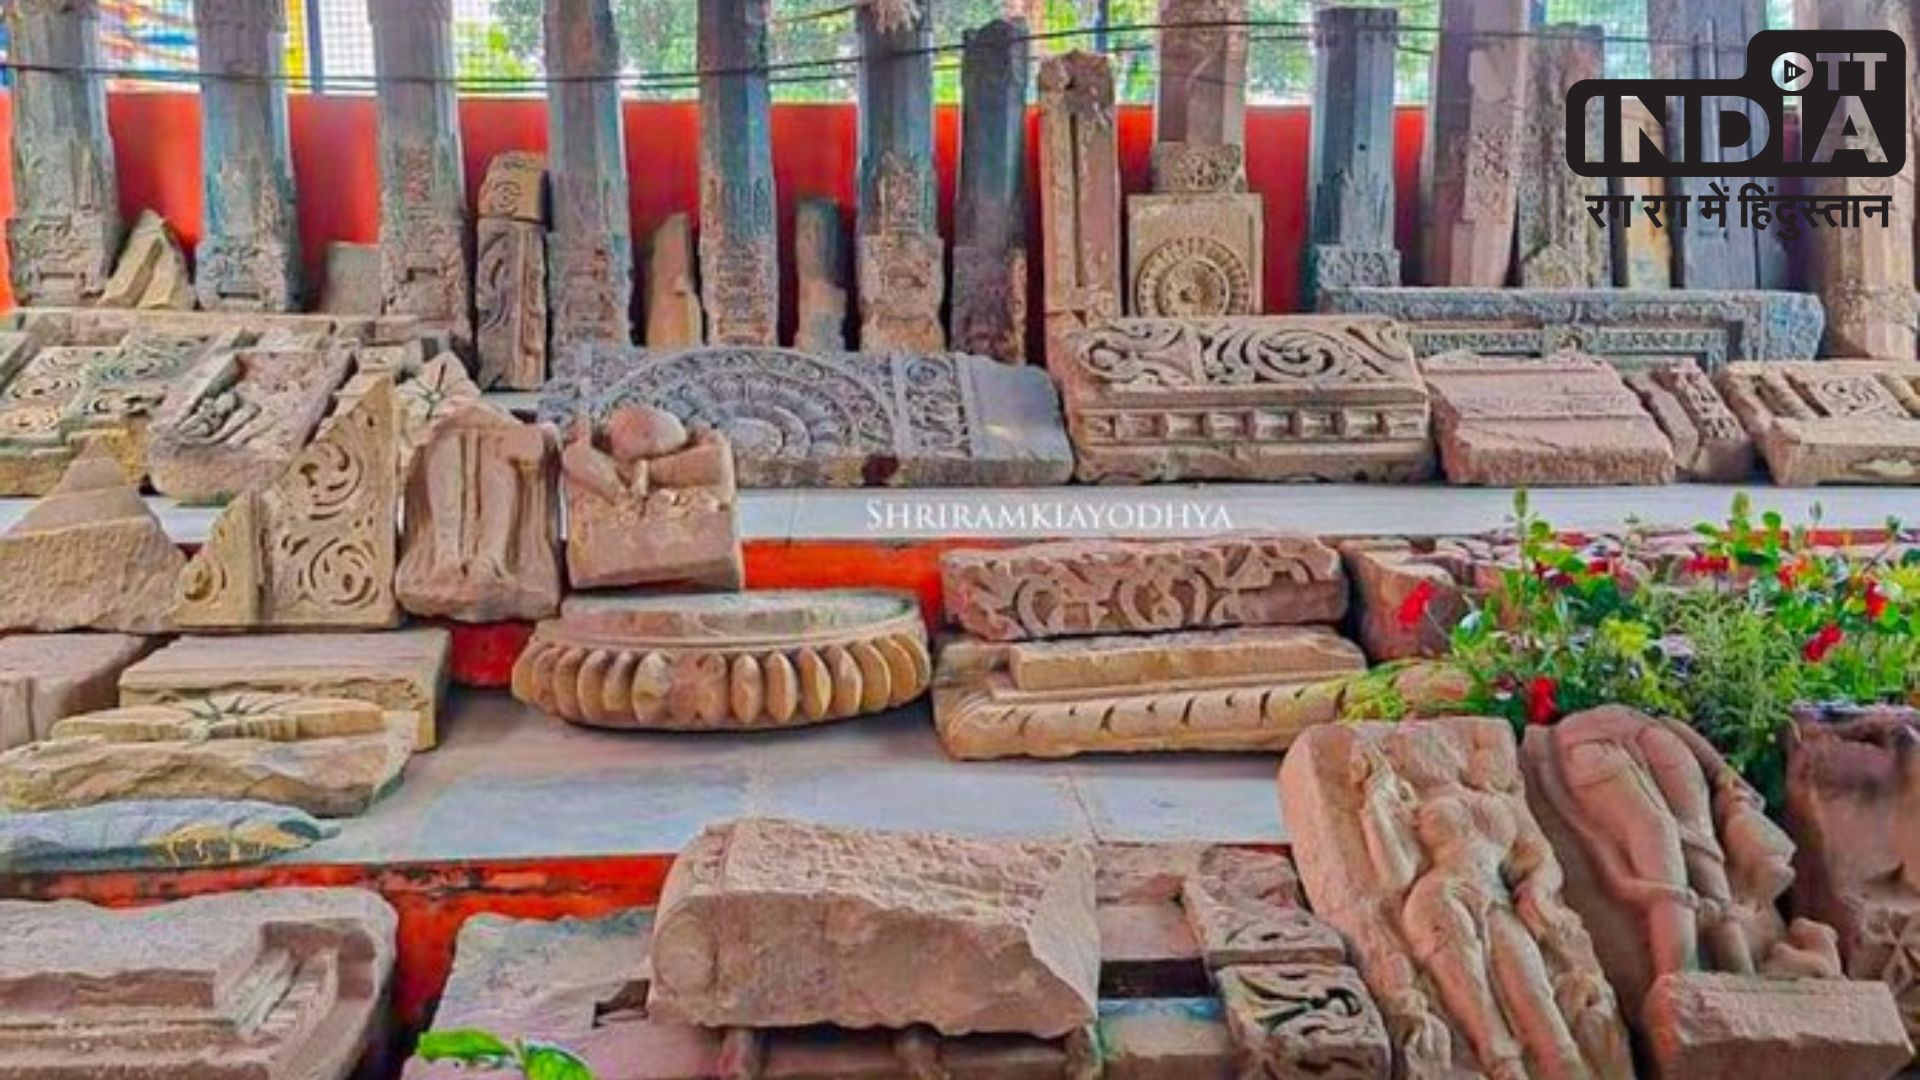 Ancient temple and statues found during excavation in Ayodhya Ram Mandir